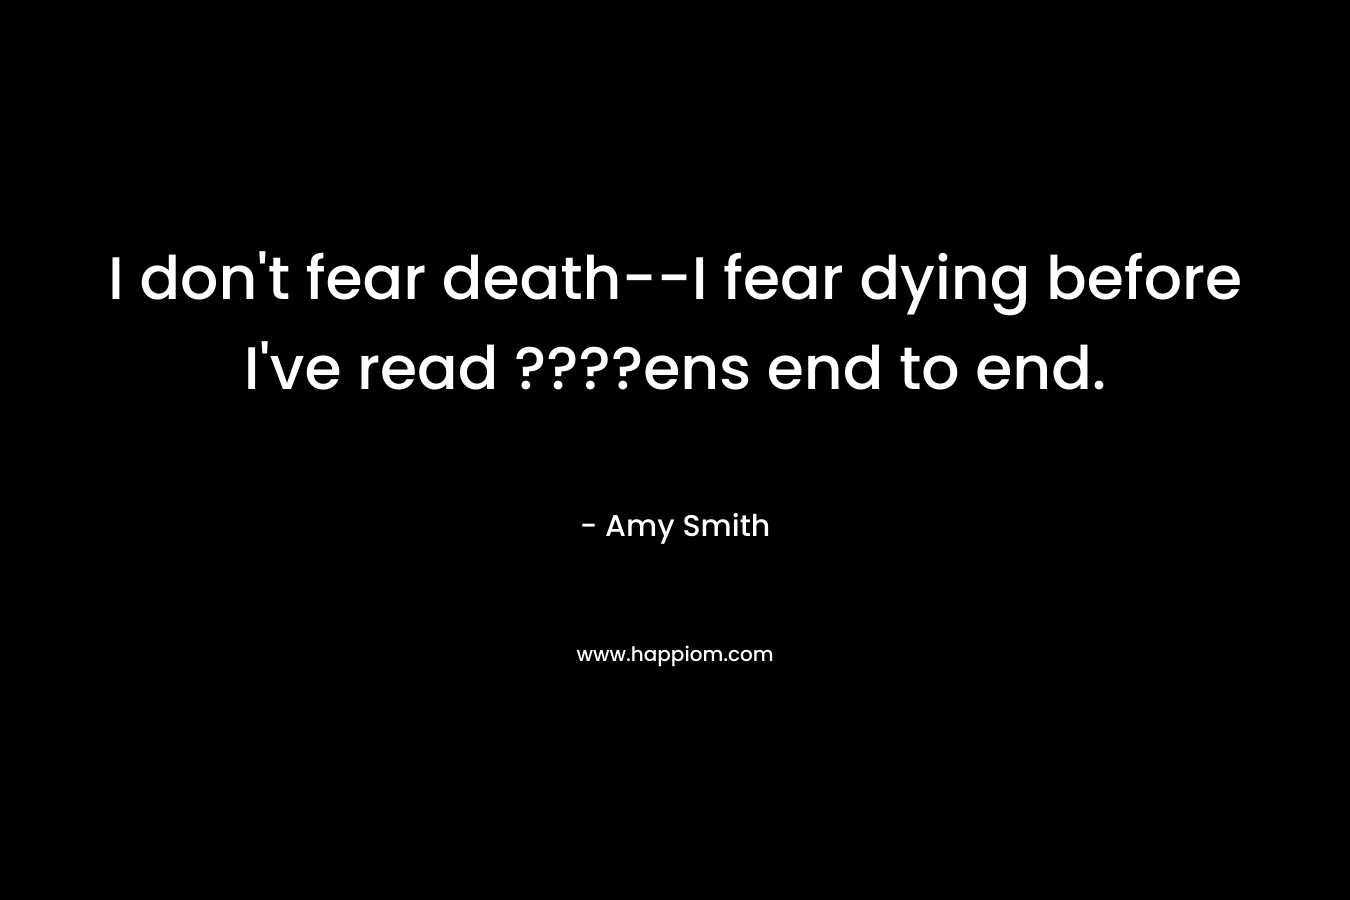 I don't fear death--I fear dying before I've read ????ens end to end.